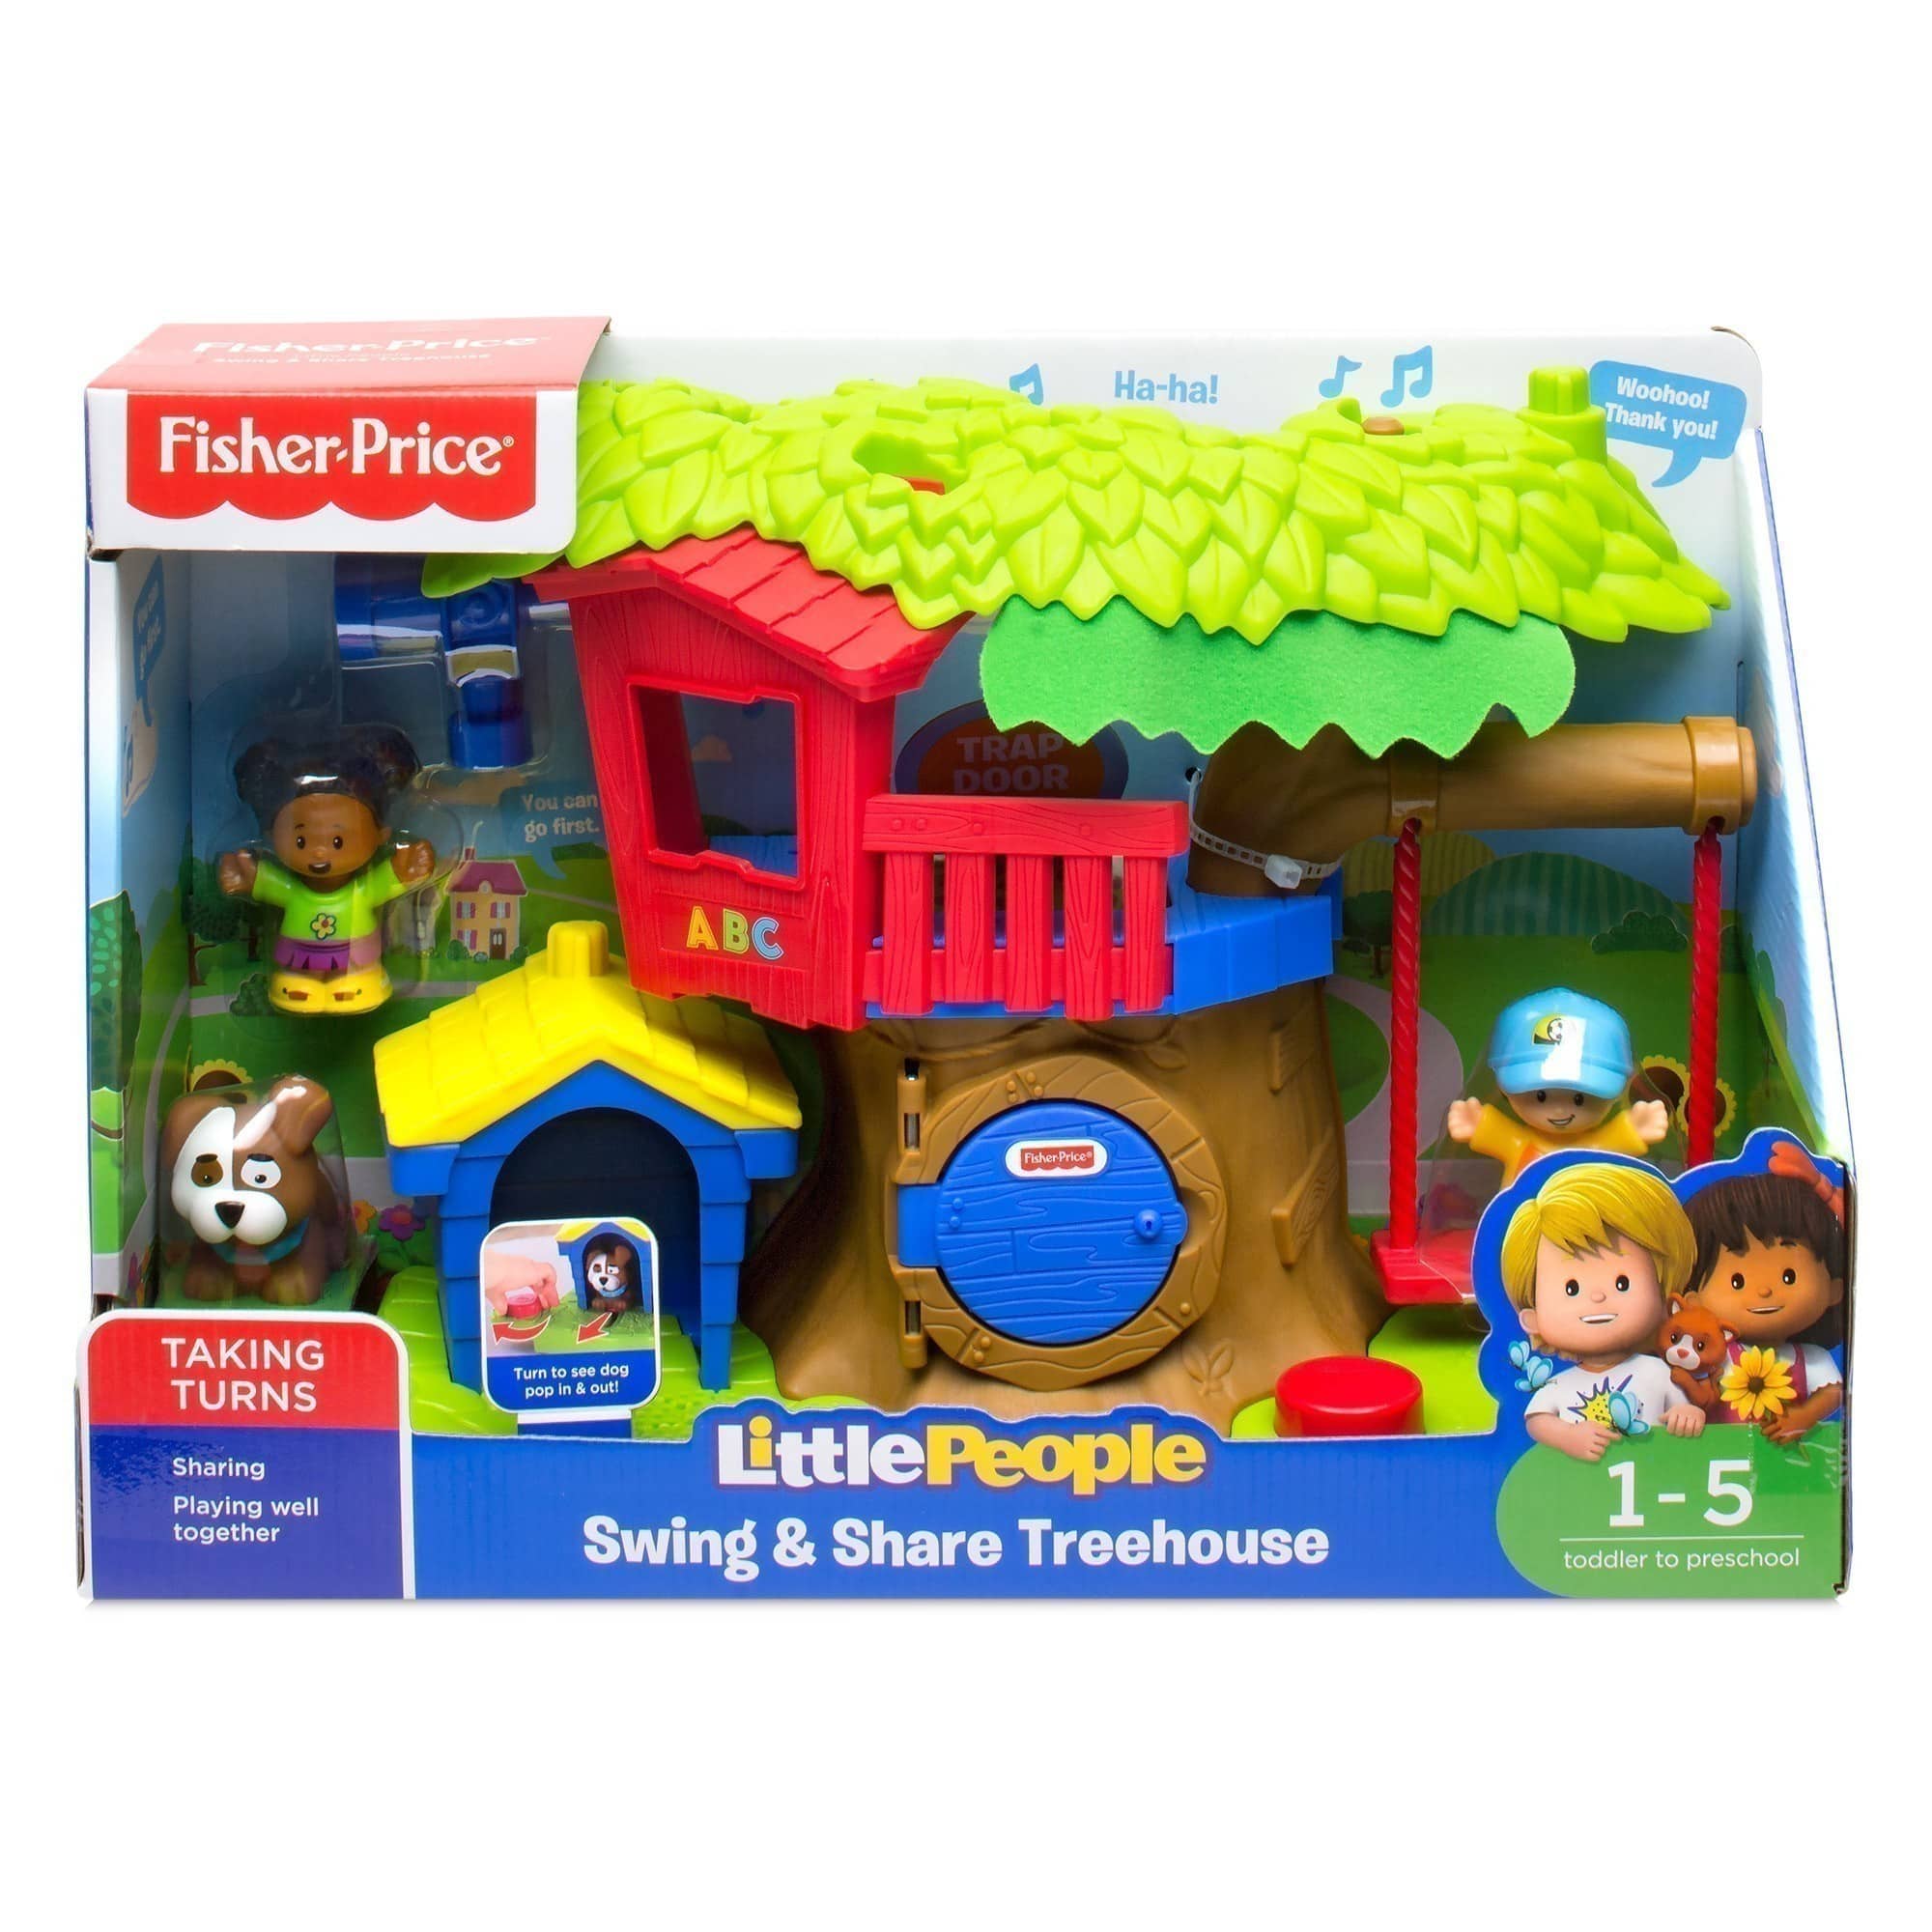 Fisher Price - Little People - Swing & Share Treehouse